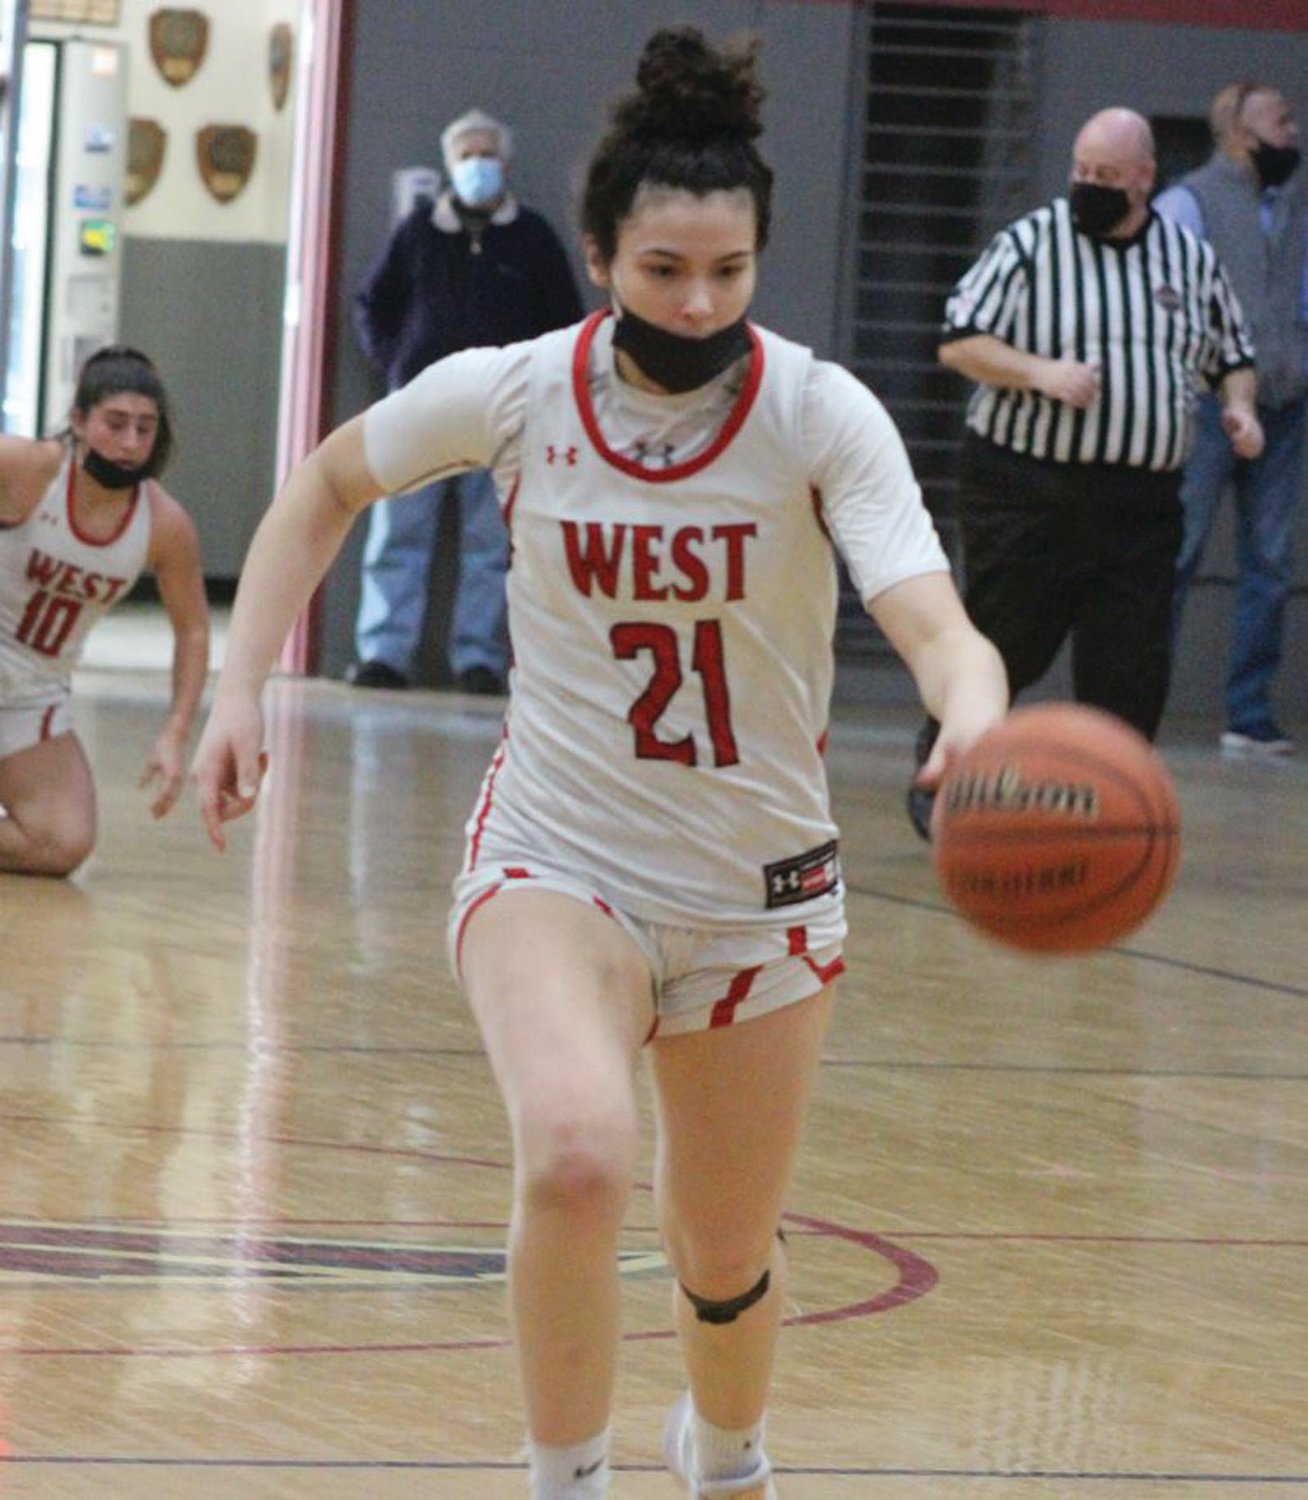 UP THE COURT: West’s Catherine Albizu dribbles the ball up the court.